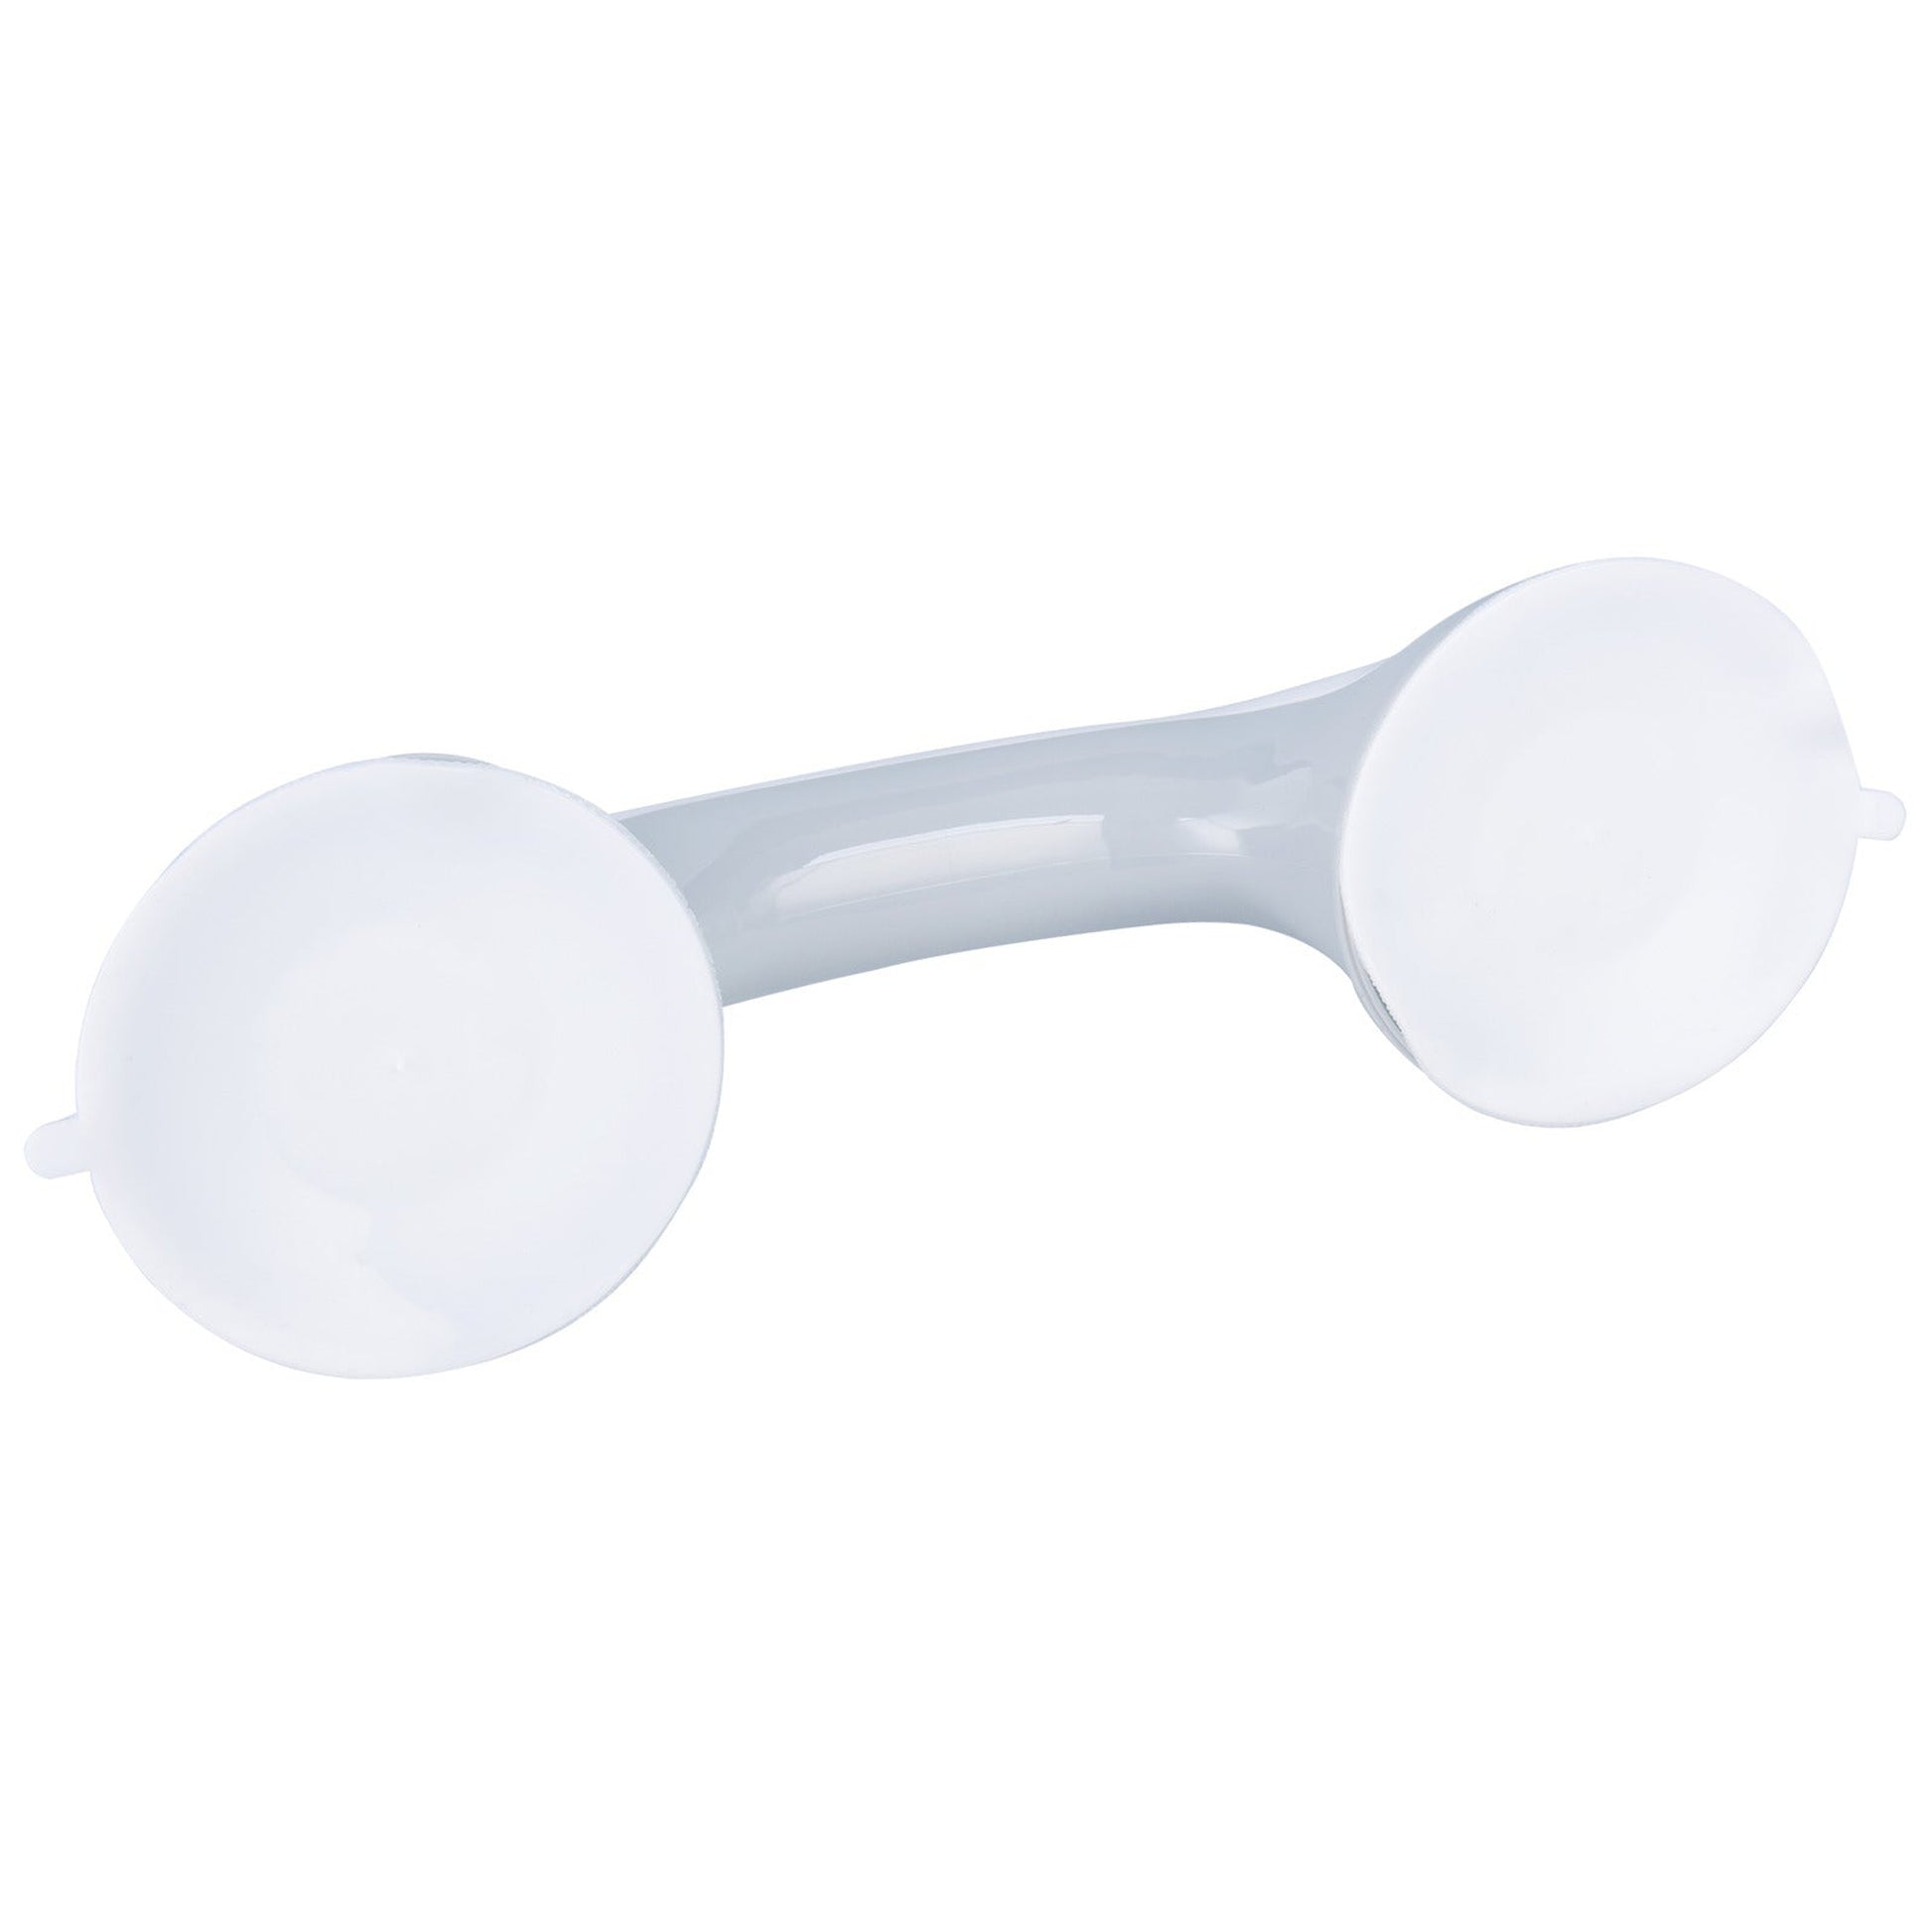 Evekare 12" White Suction Mount Support Bar